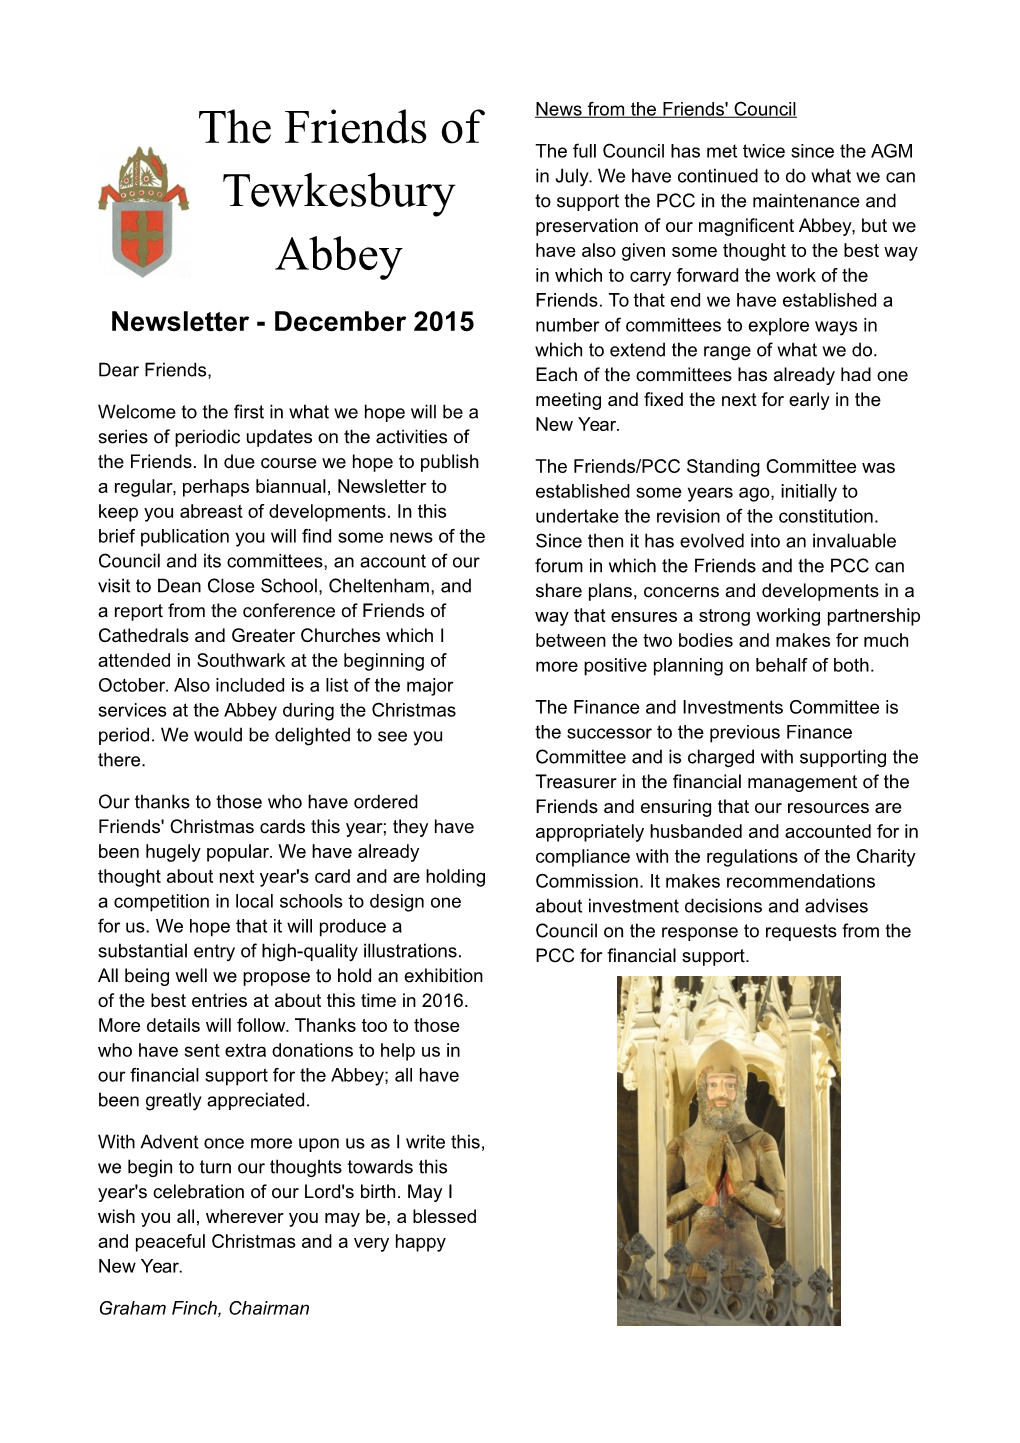 The Friends of Tewkesbury Abbey